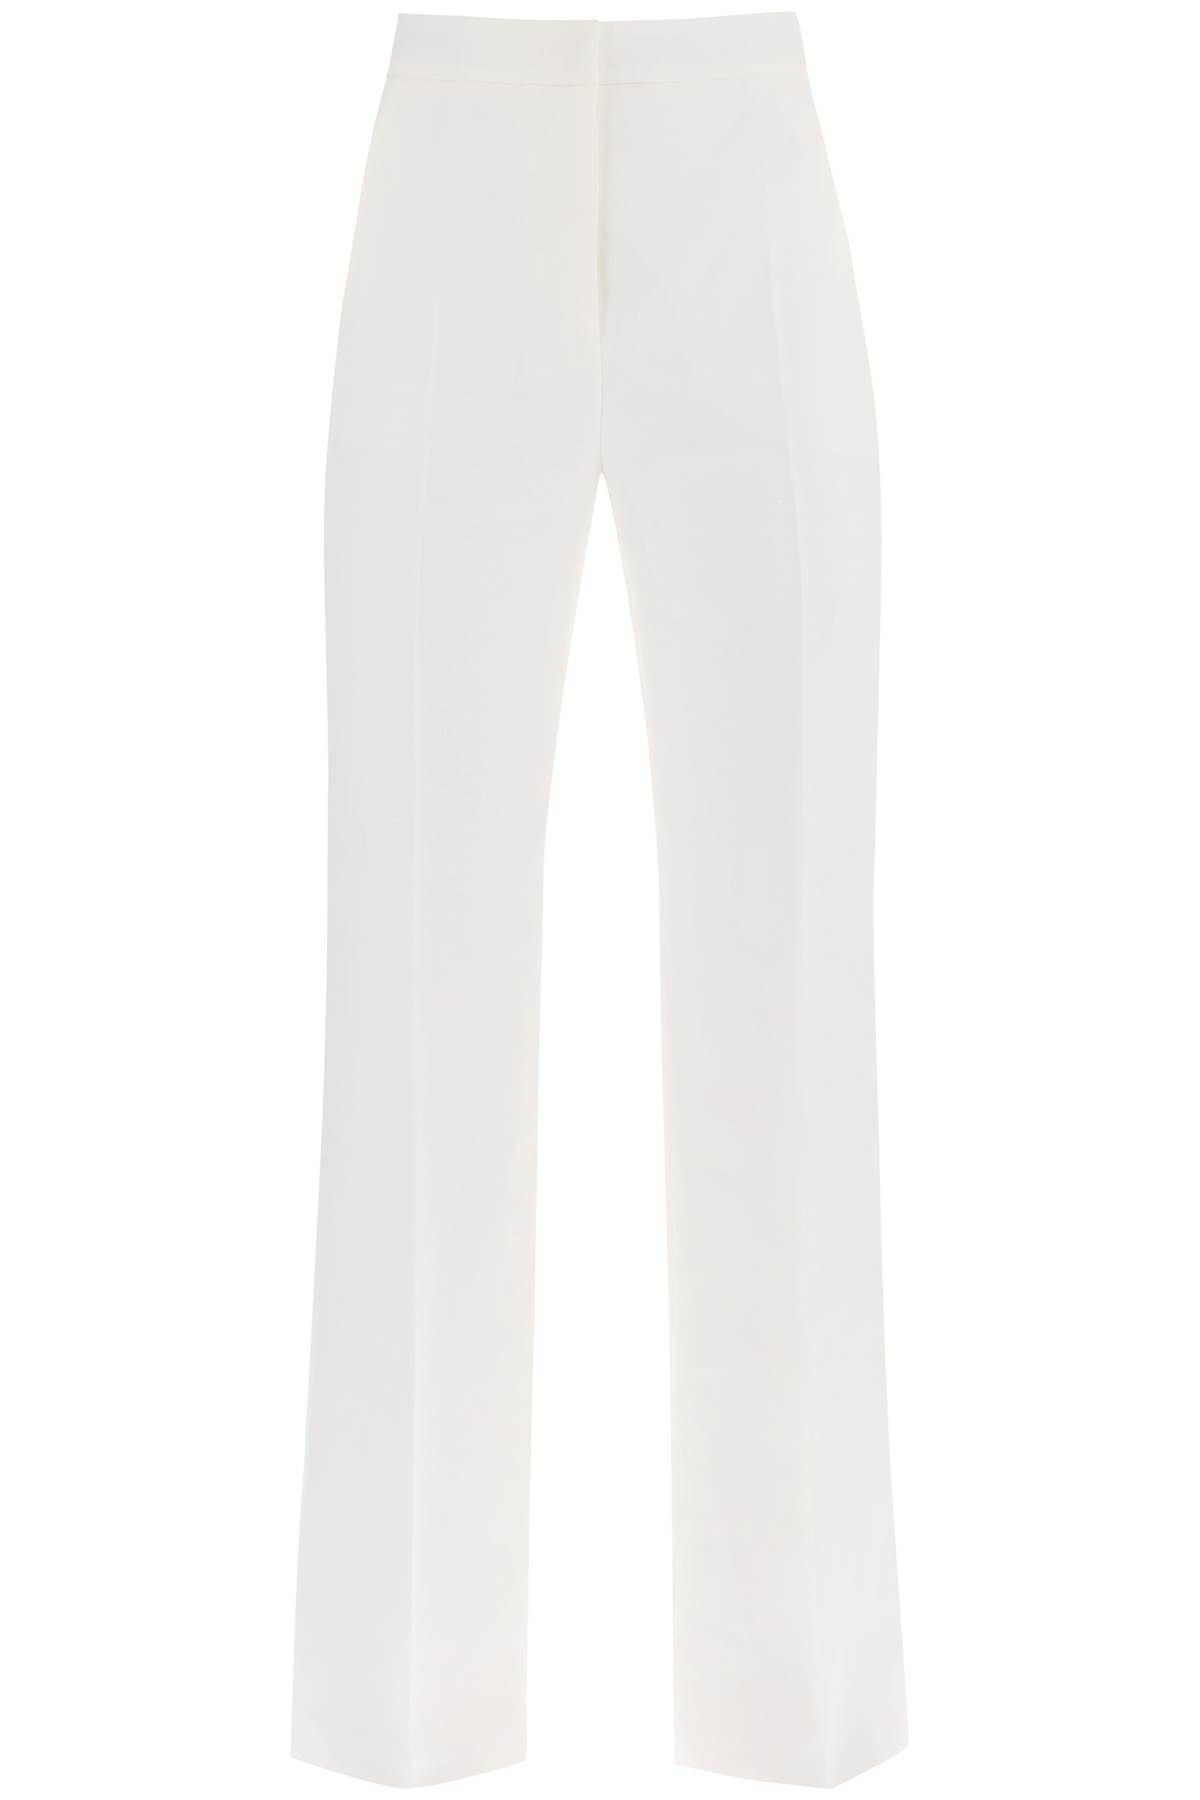 Max Mara Uncino Textured Satin Wide Pants In White